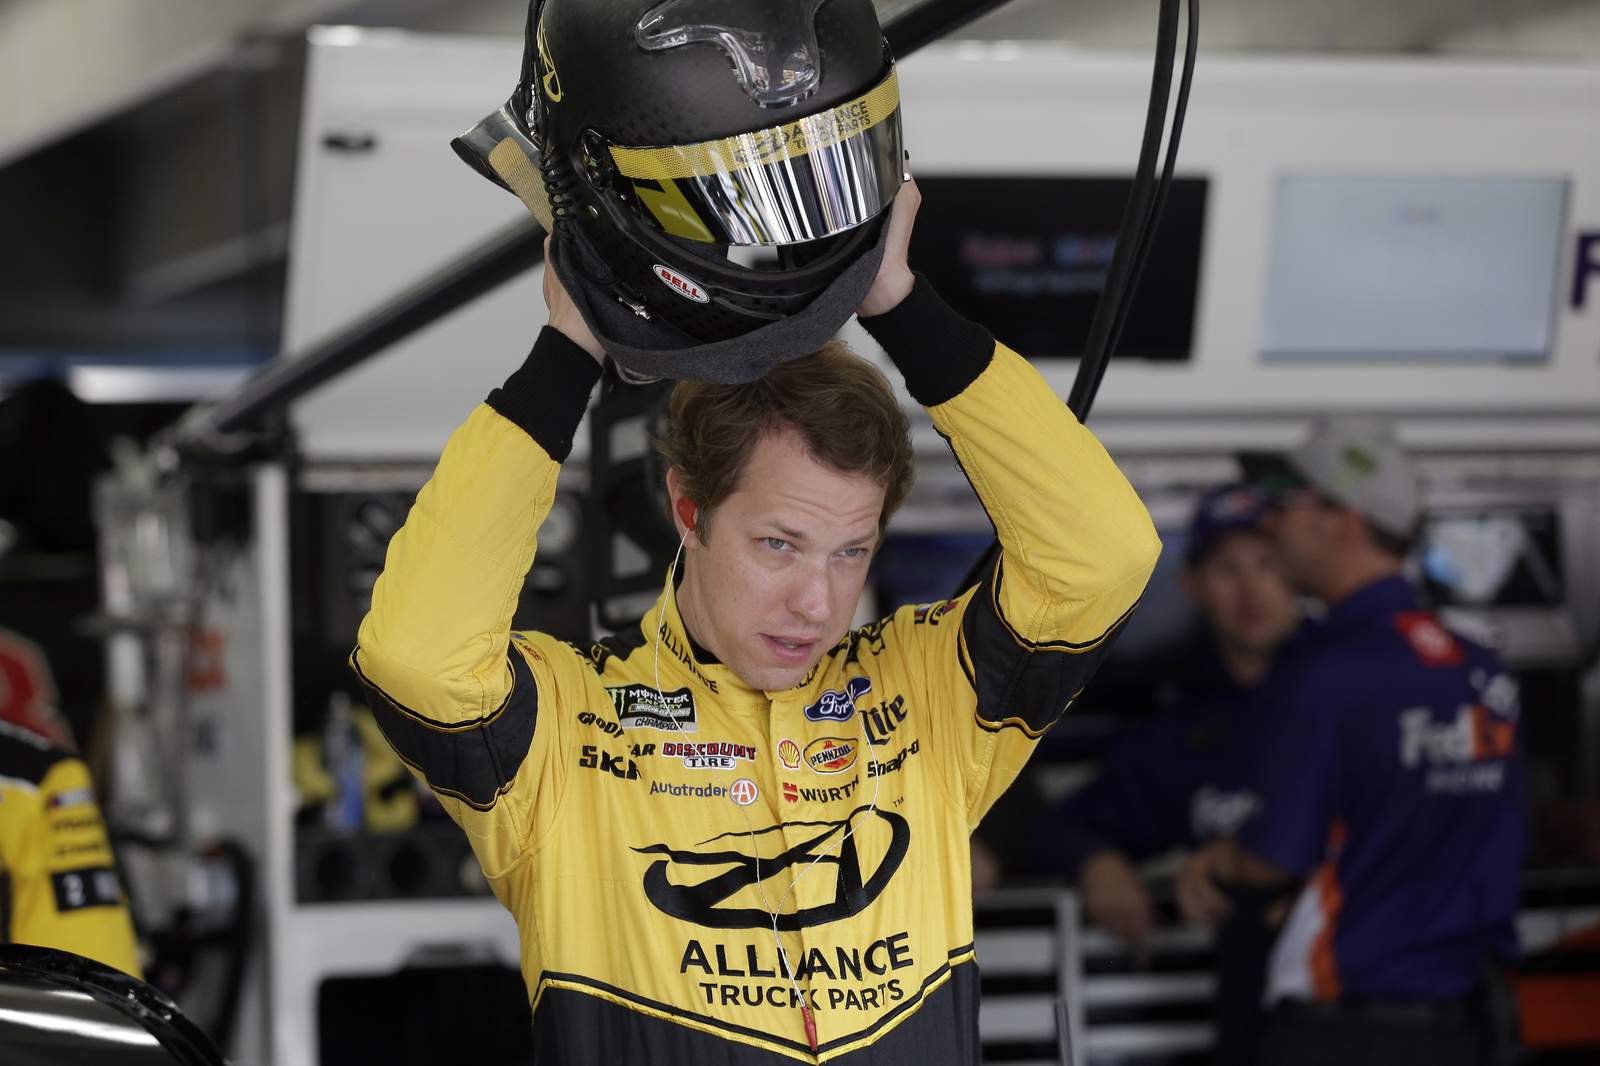 Penske drivers ready to perform after huge offseason shakeup